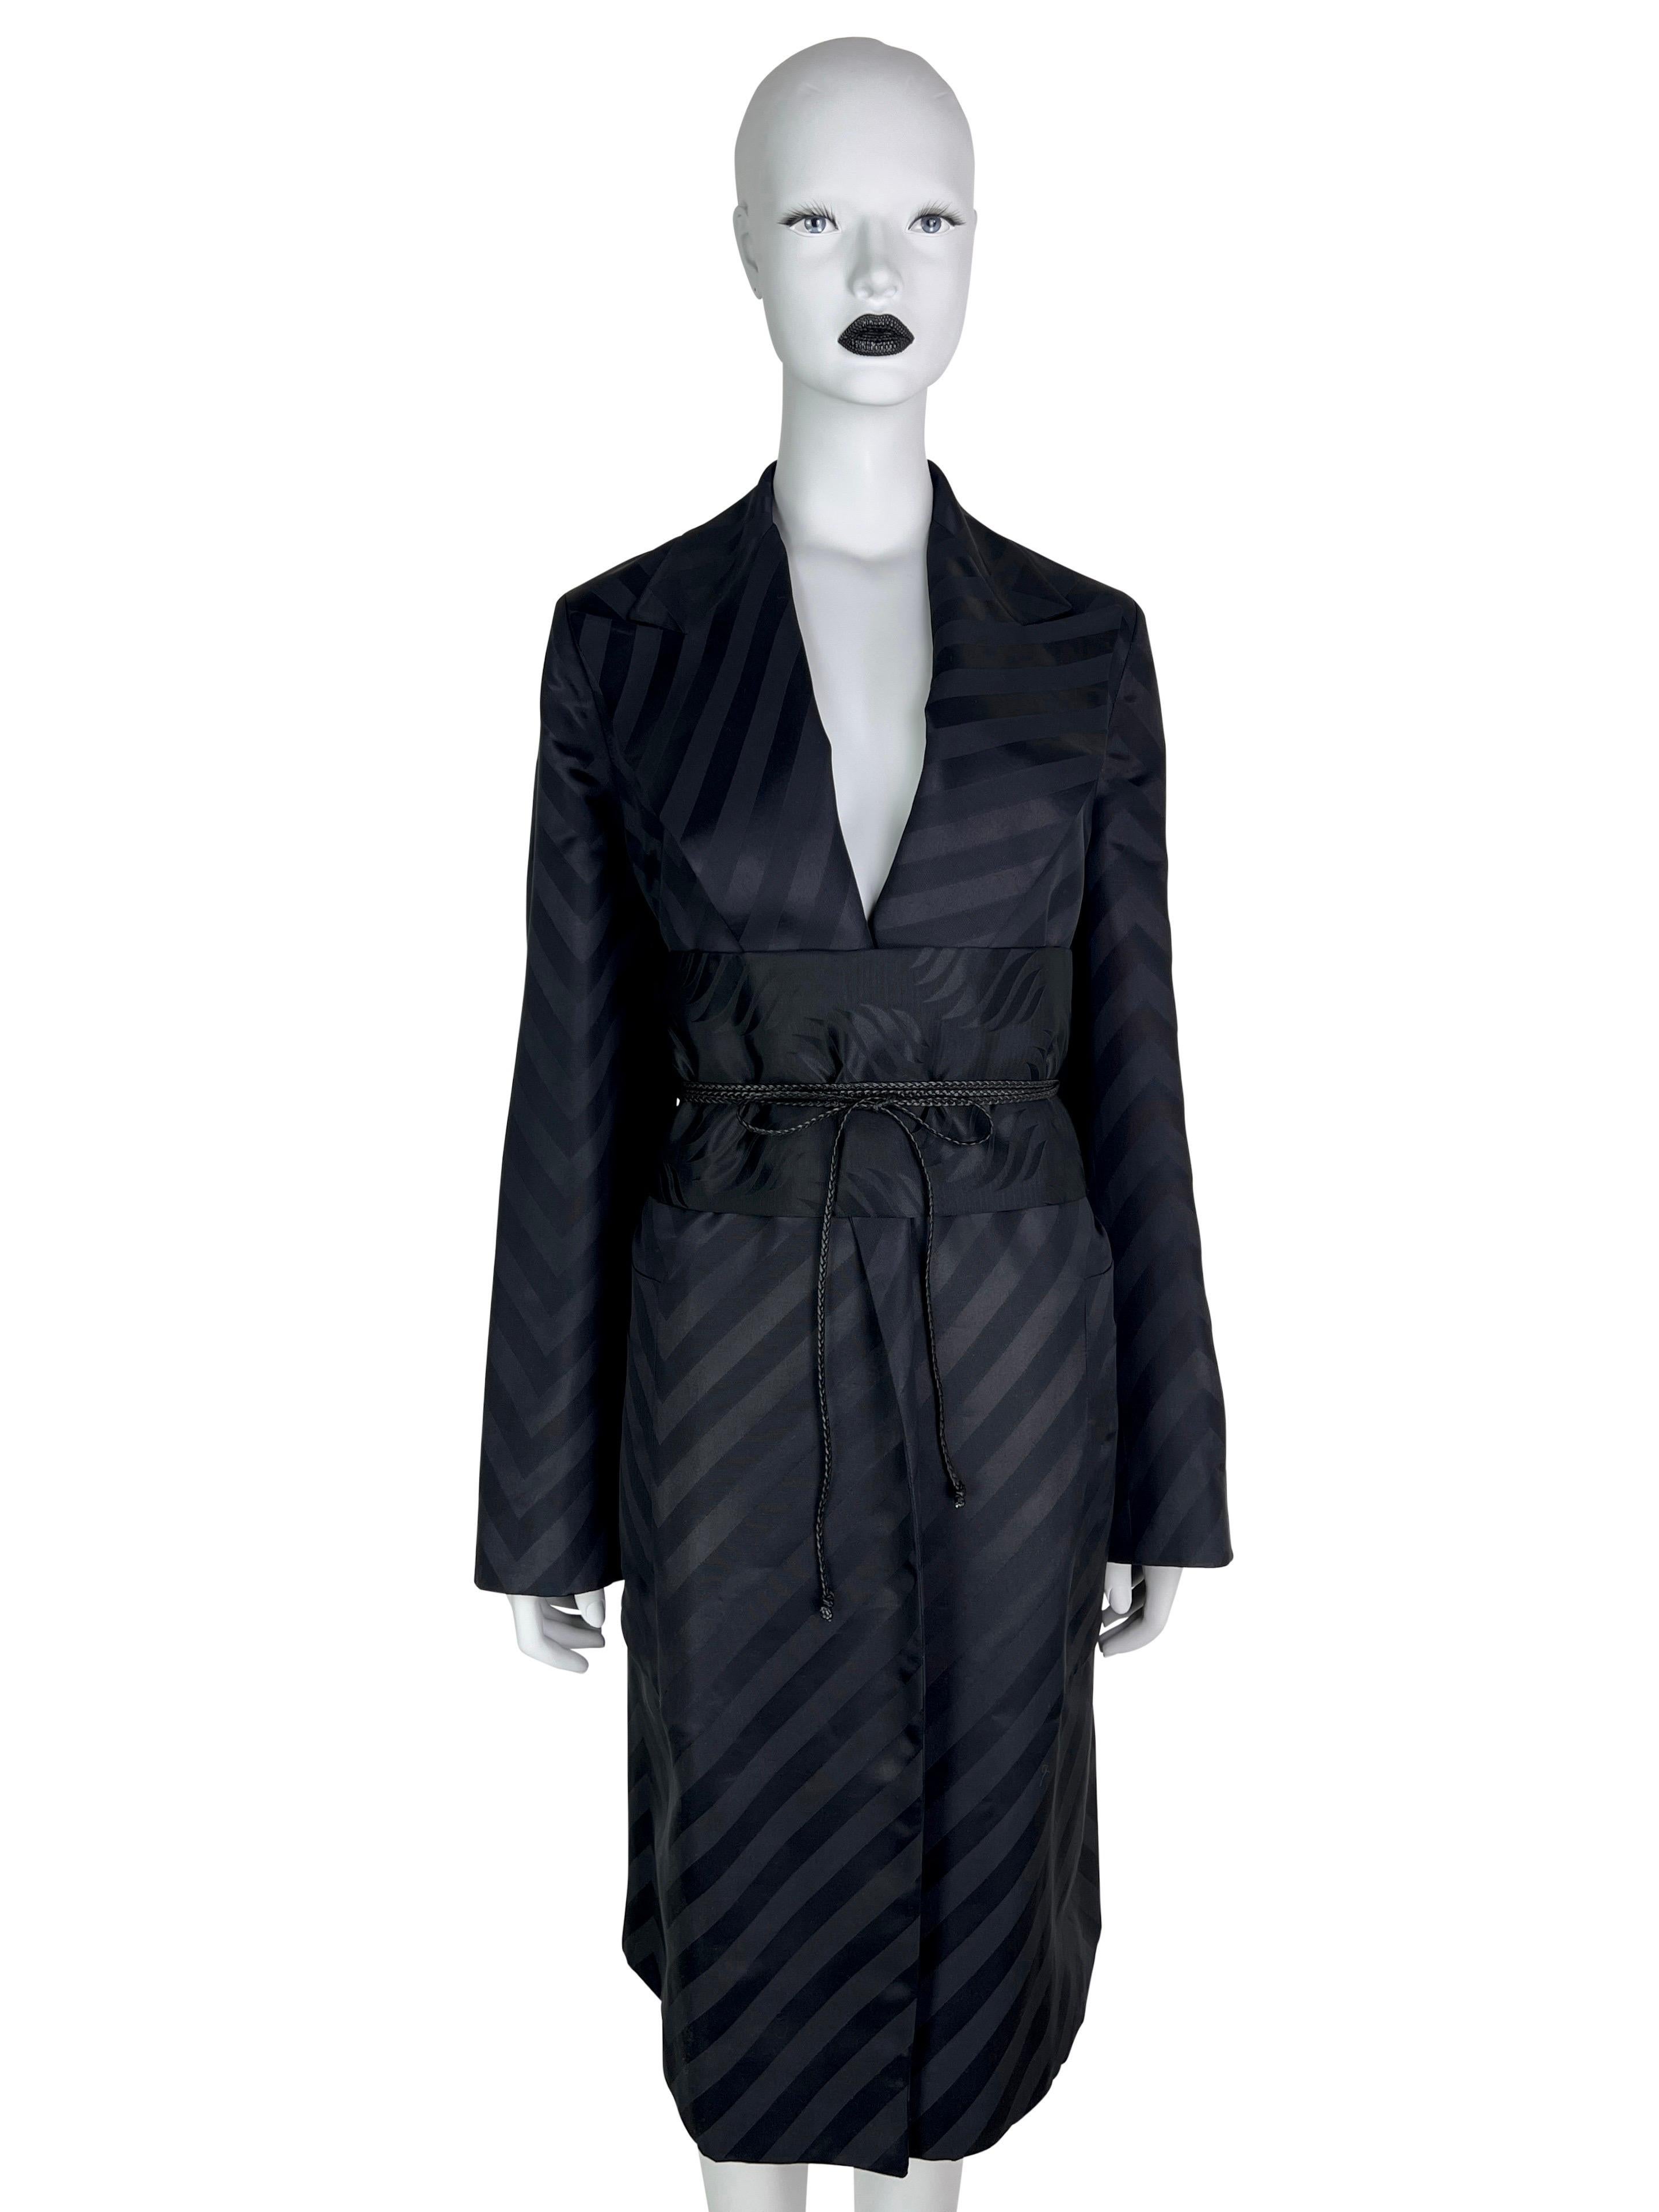 As seen on the runway, this stunning kimono-style coat can be worn as an open coat as it doesn’t have a closure (see the runway look with trousers), or as in the original look with a matching obi-style silk belt with leather straps. 


We are happy